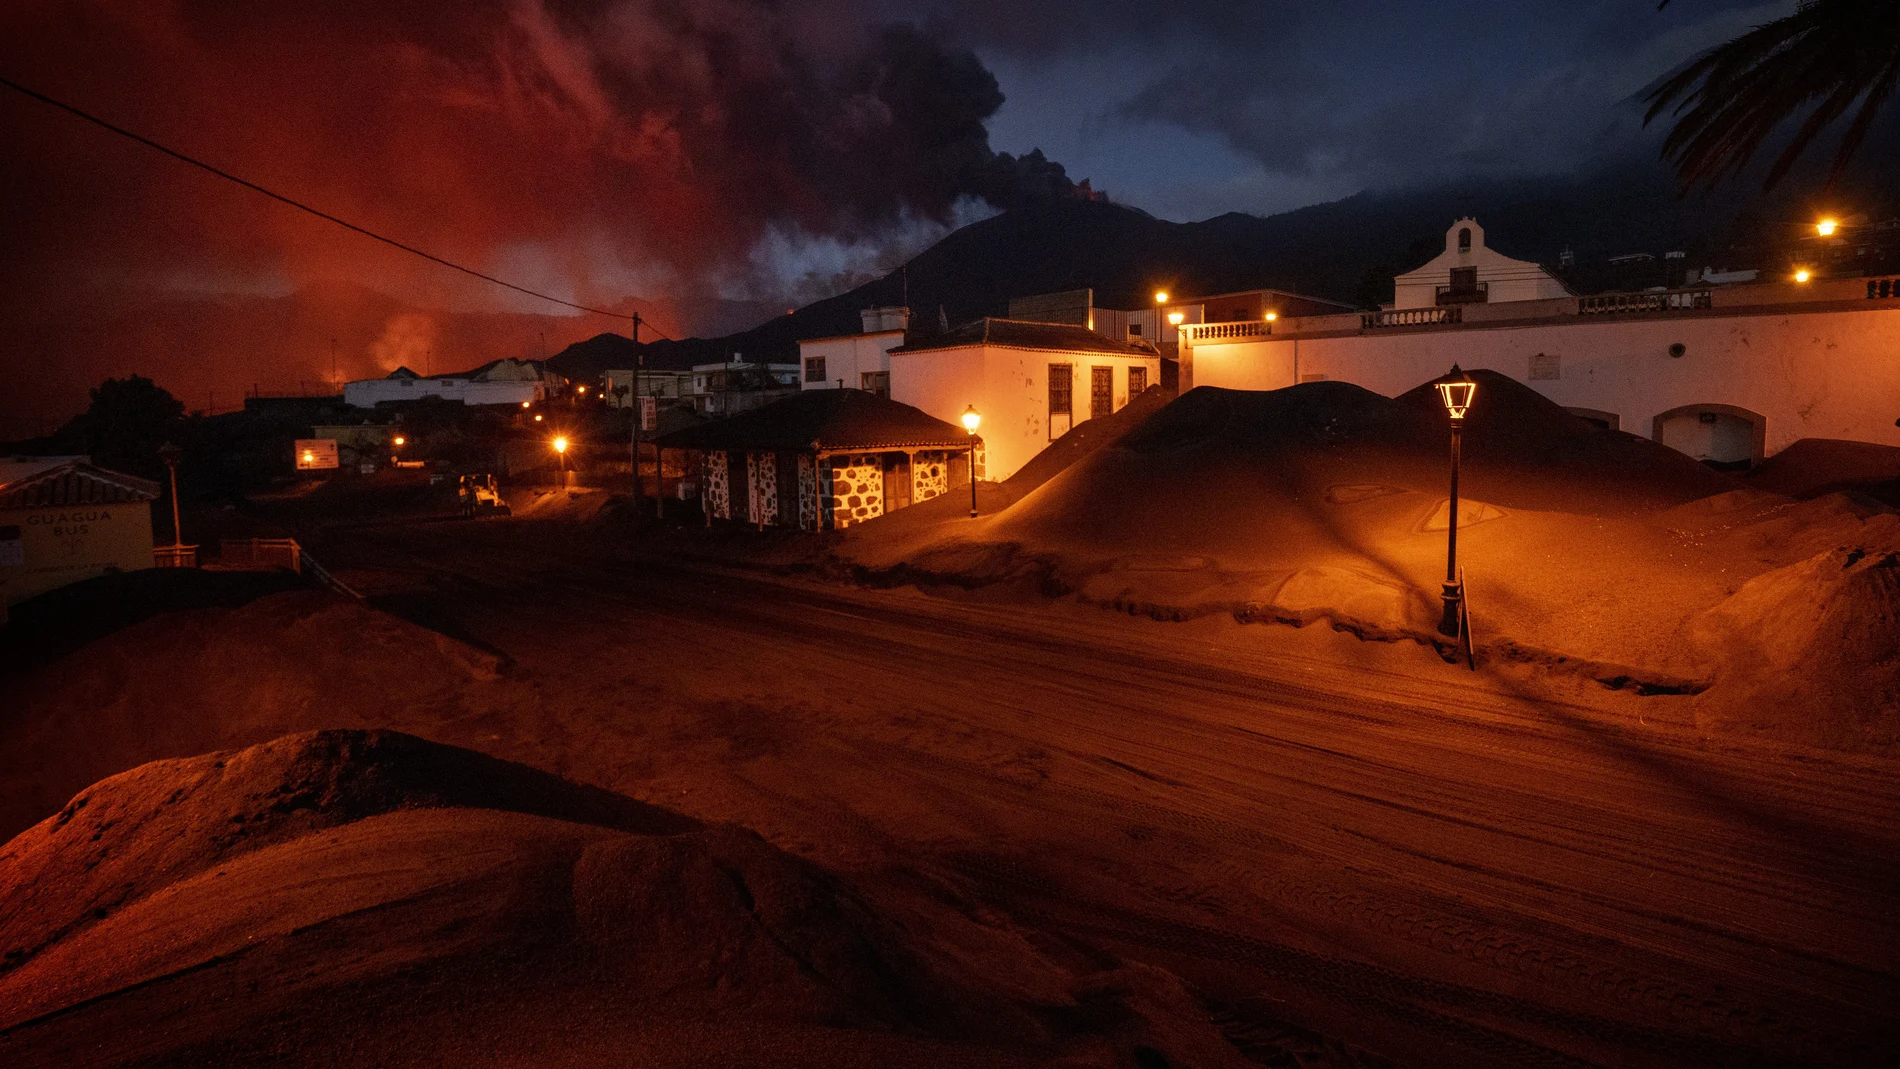 Ash covers the streets and houses in Las Manchas village as lava flows from the volcano, on the Canary island of La Palma, Spain, Monday, Dec. 6 2021. (AP Photo/Emilio Morenatti)